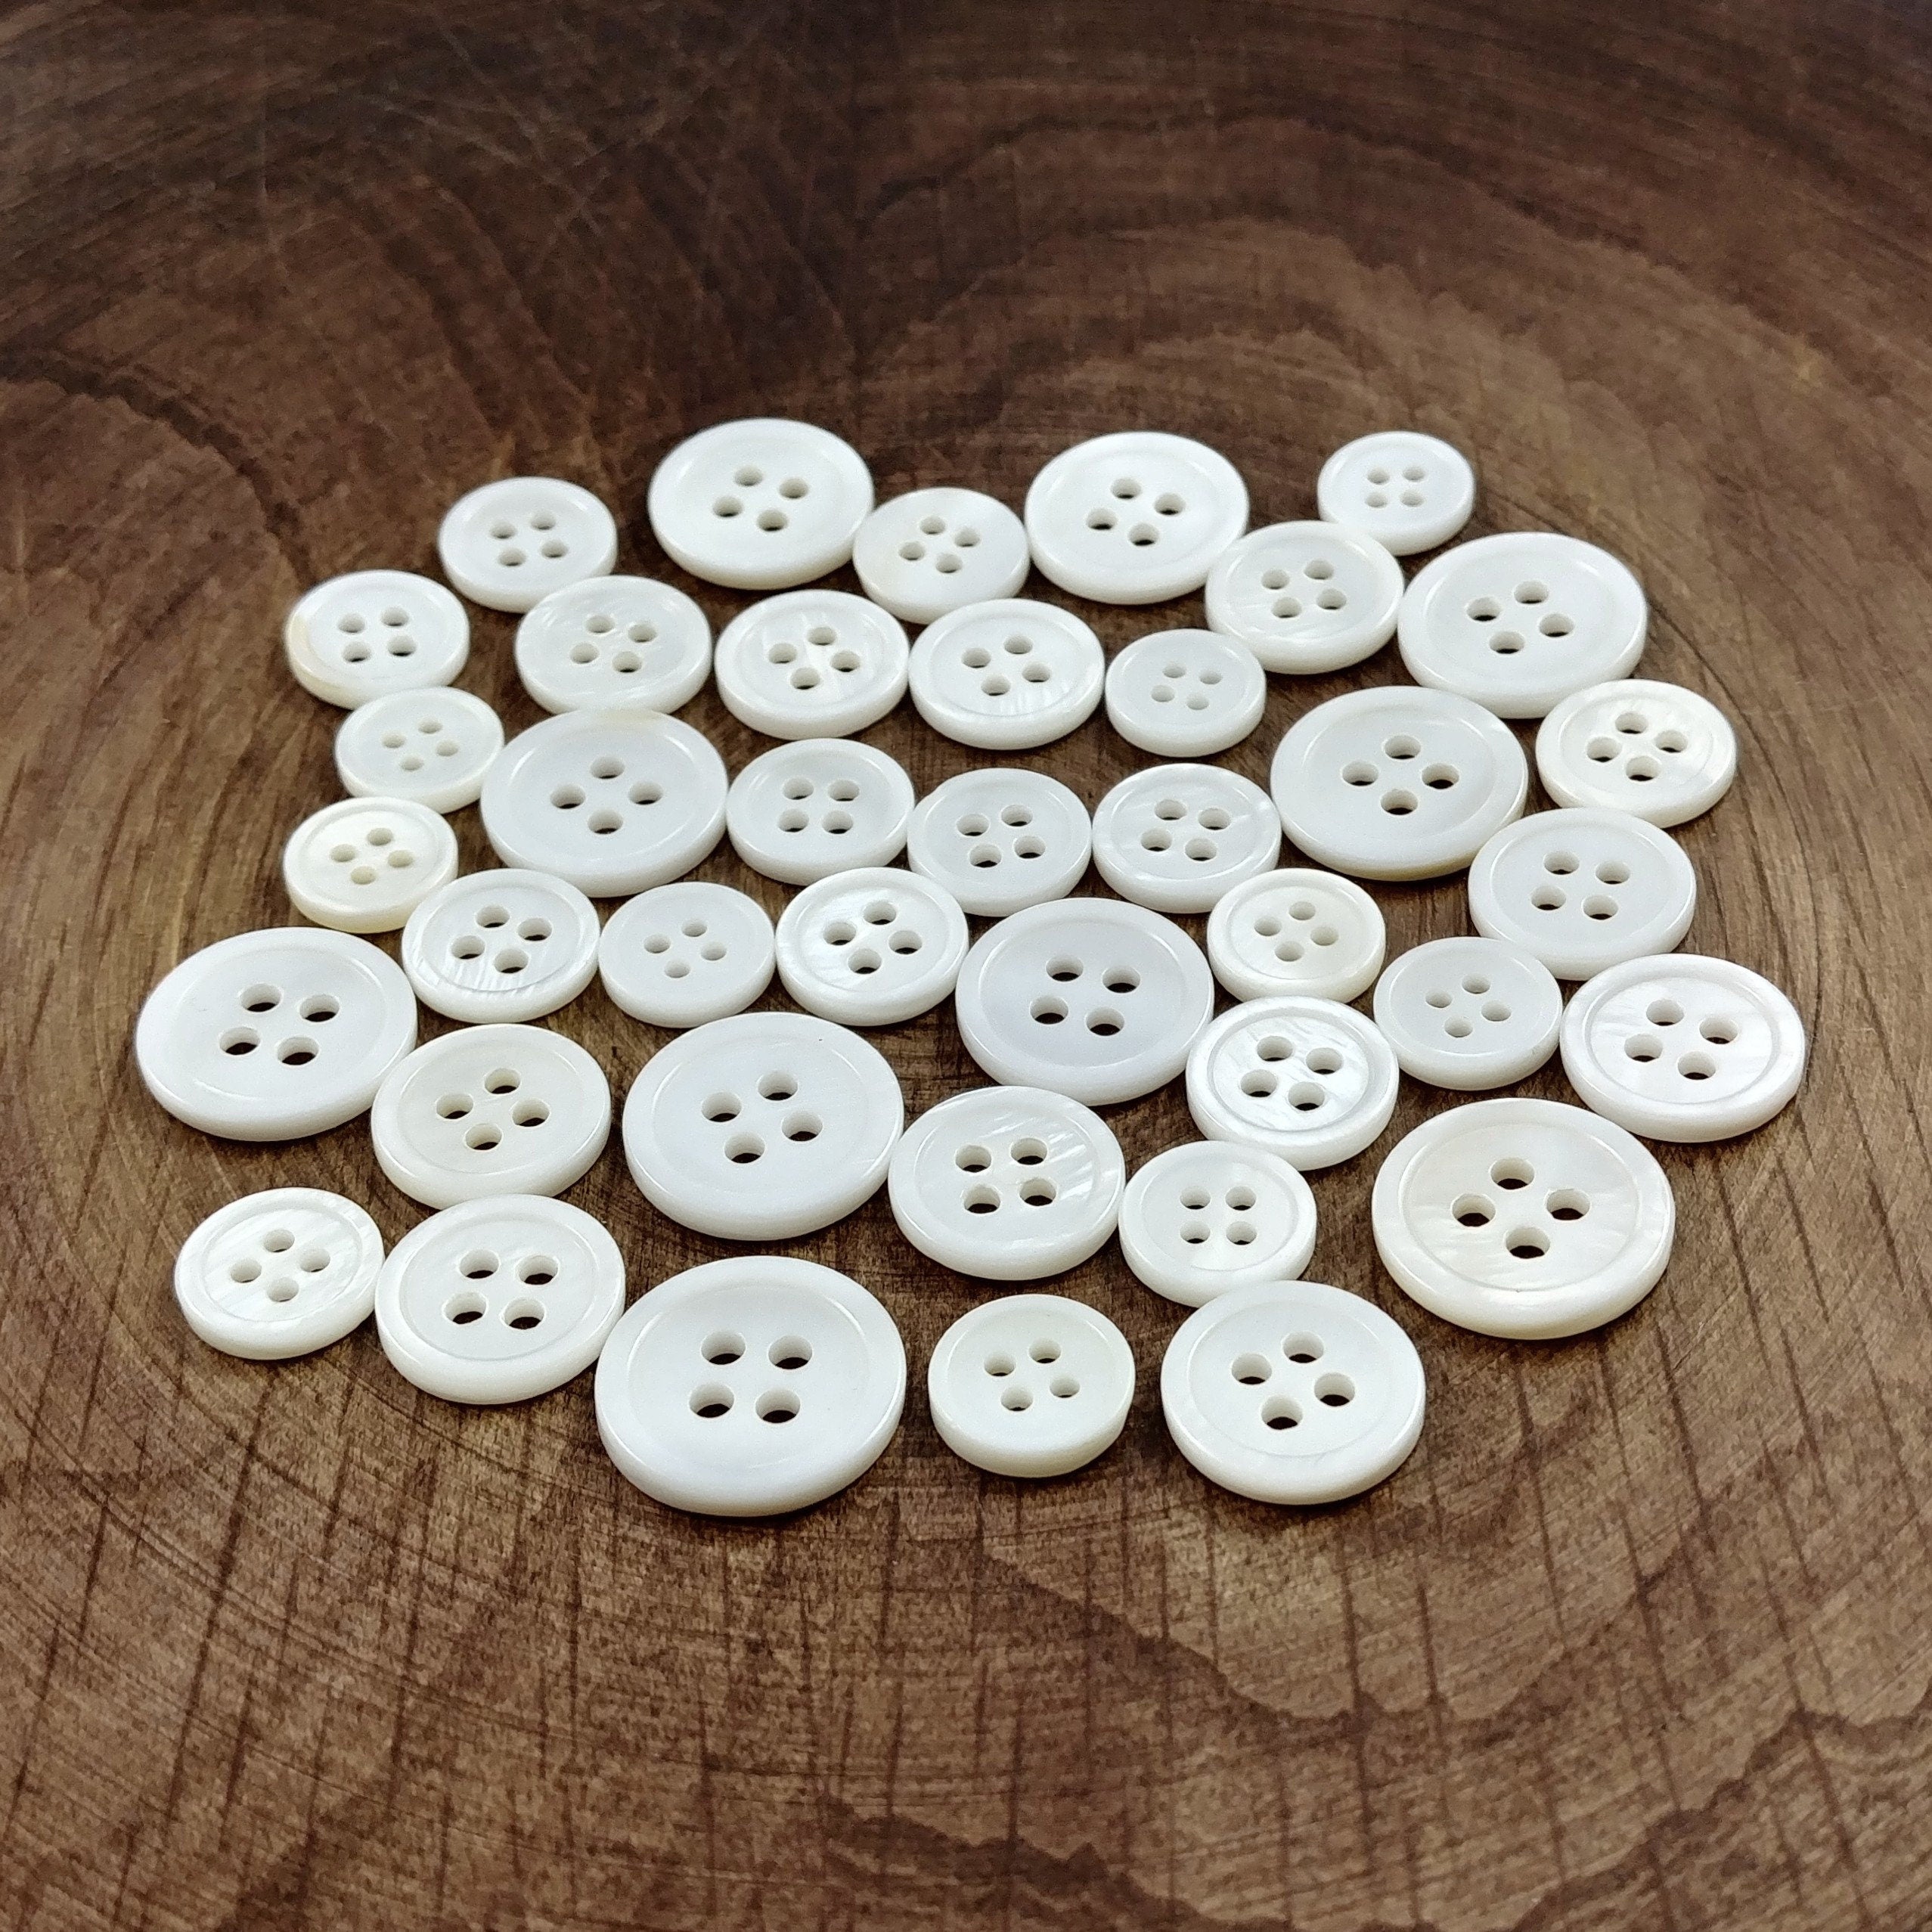 Black Genuine Mother of Pearl Buttons, 22Pcs/Pack (16pcs 15mm+6pcs 20mm), 4  Hole Bulk Natural MOP Pearl Shell Buttons for DIY Sewing